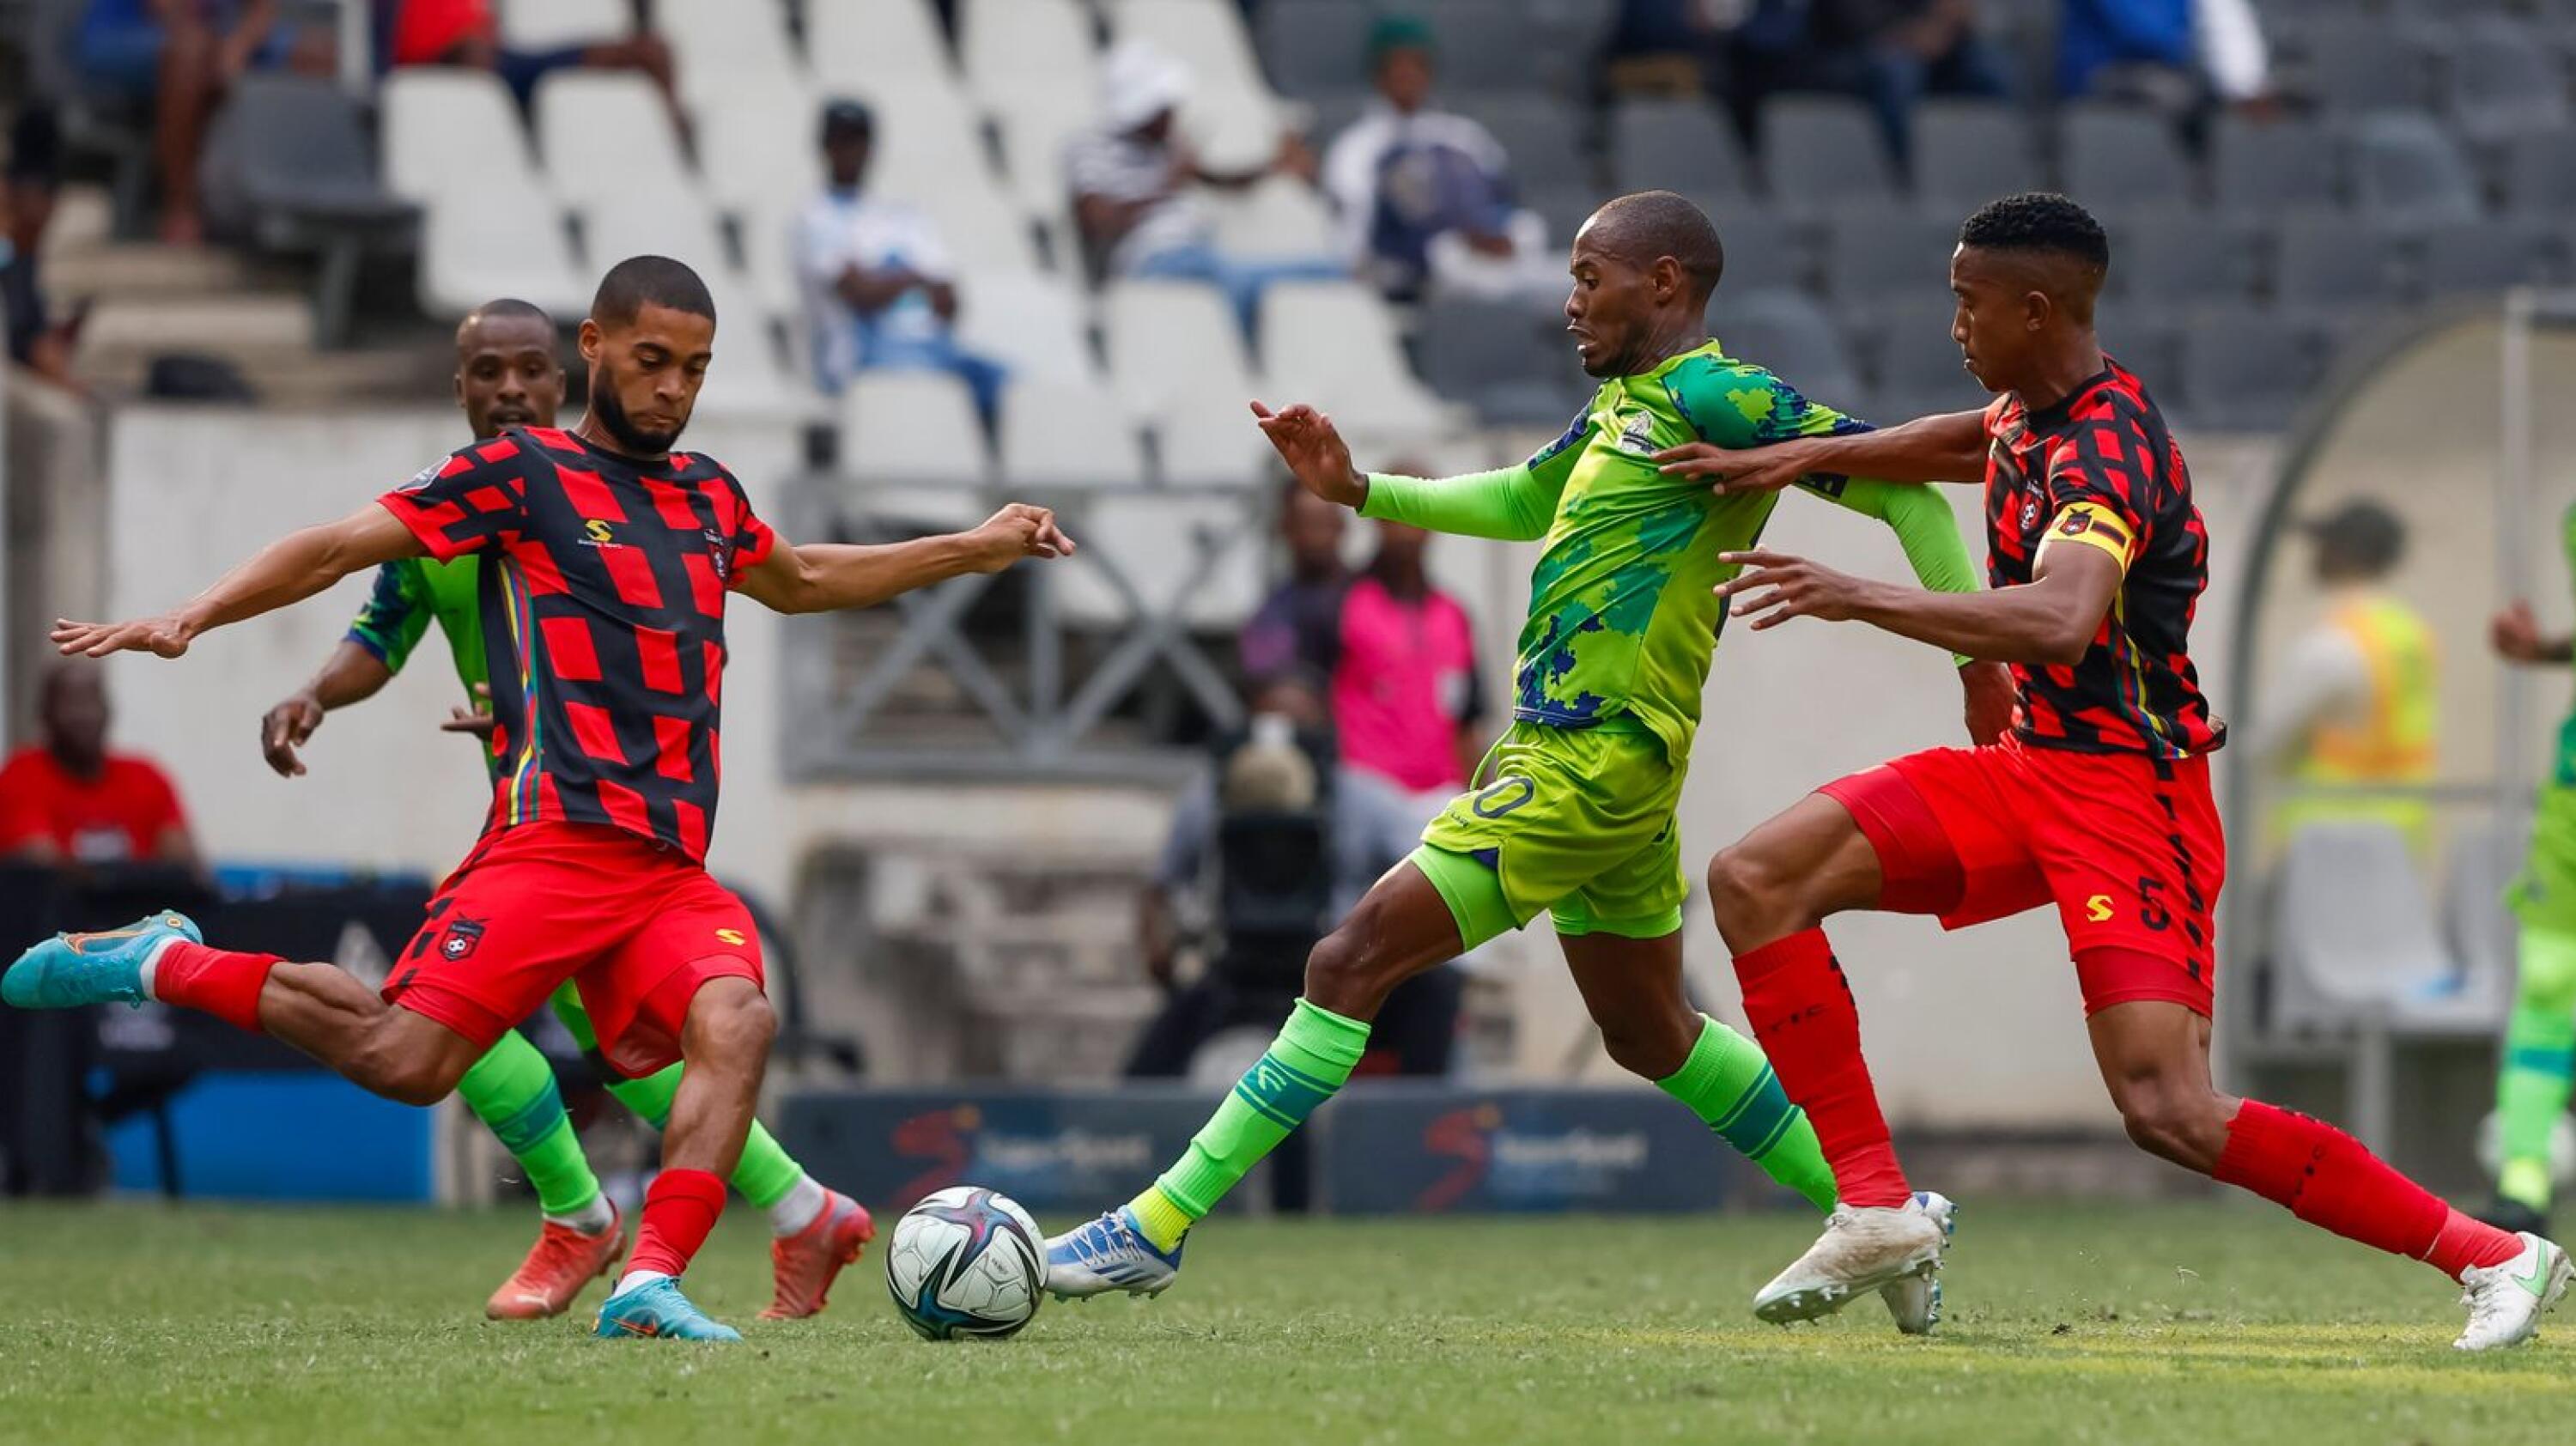 Ebrahim Seedat of TS Galaxy FC and Sibusiso Sibeko of Marumo Gallants FC fight for the ball during their DStv Premiership match at Mbombela Stadium in Mbombela on Saturday